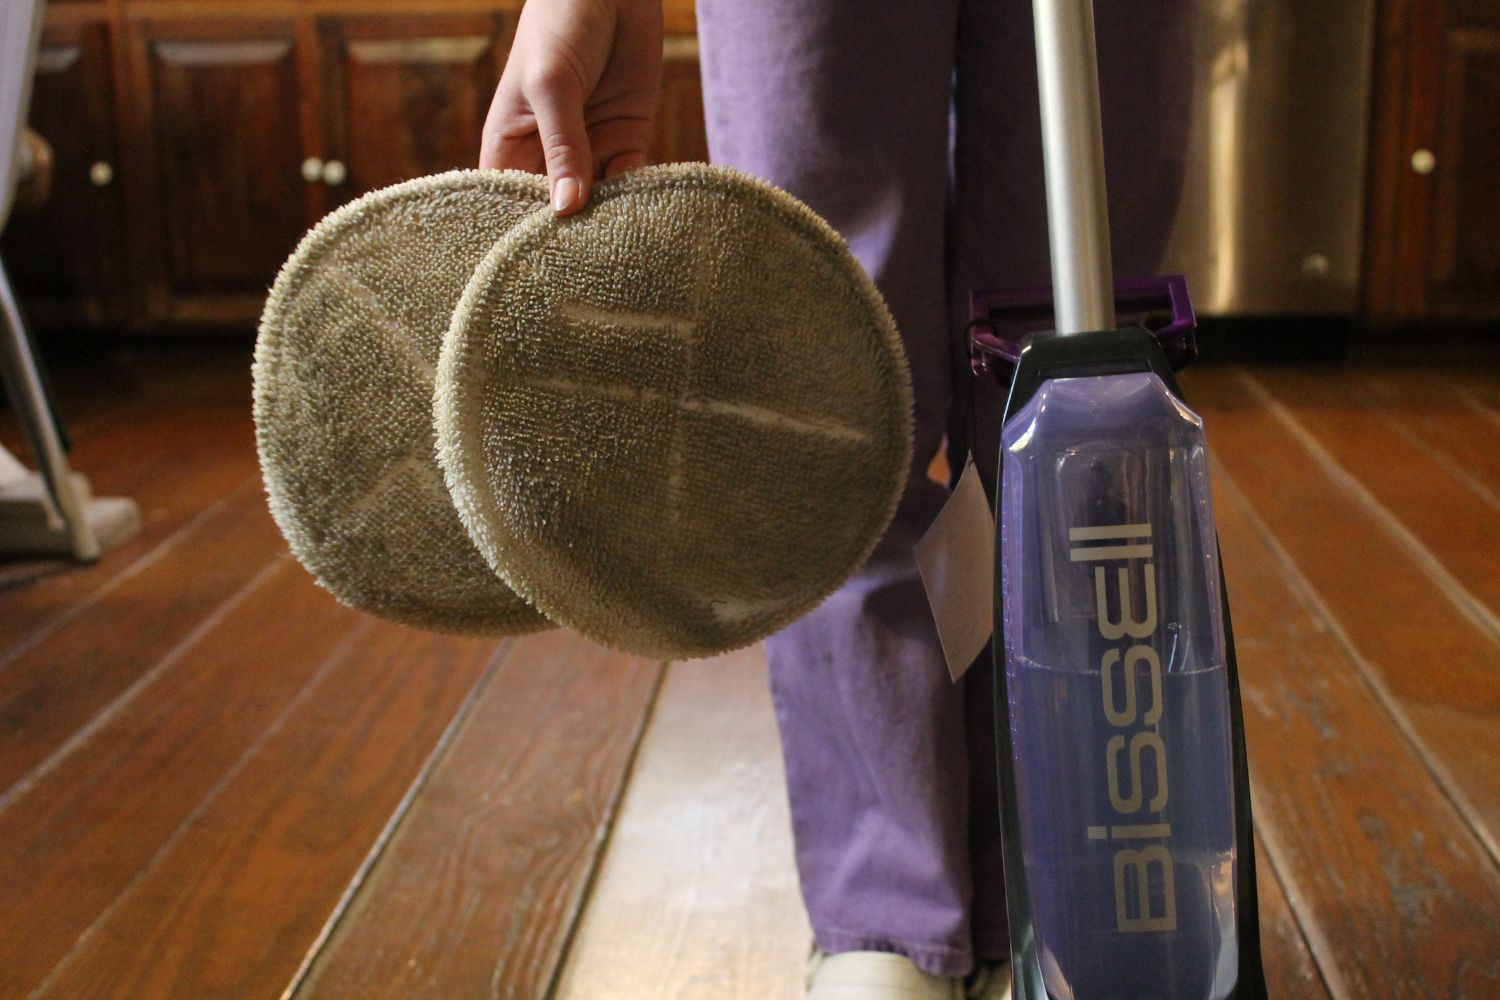 A person holding dirty floor scrubber pads after using the Bissell SpinWave floor scrubber to clean a wood floor.